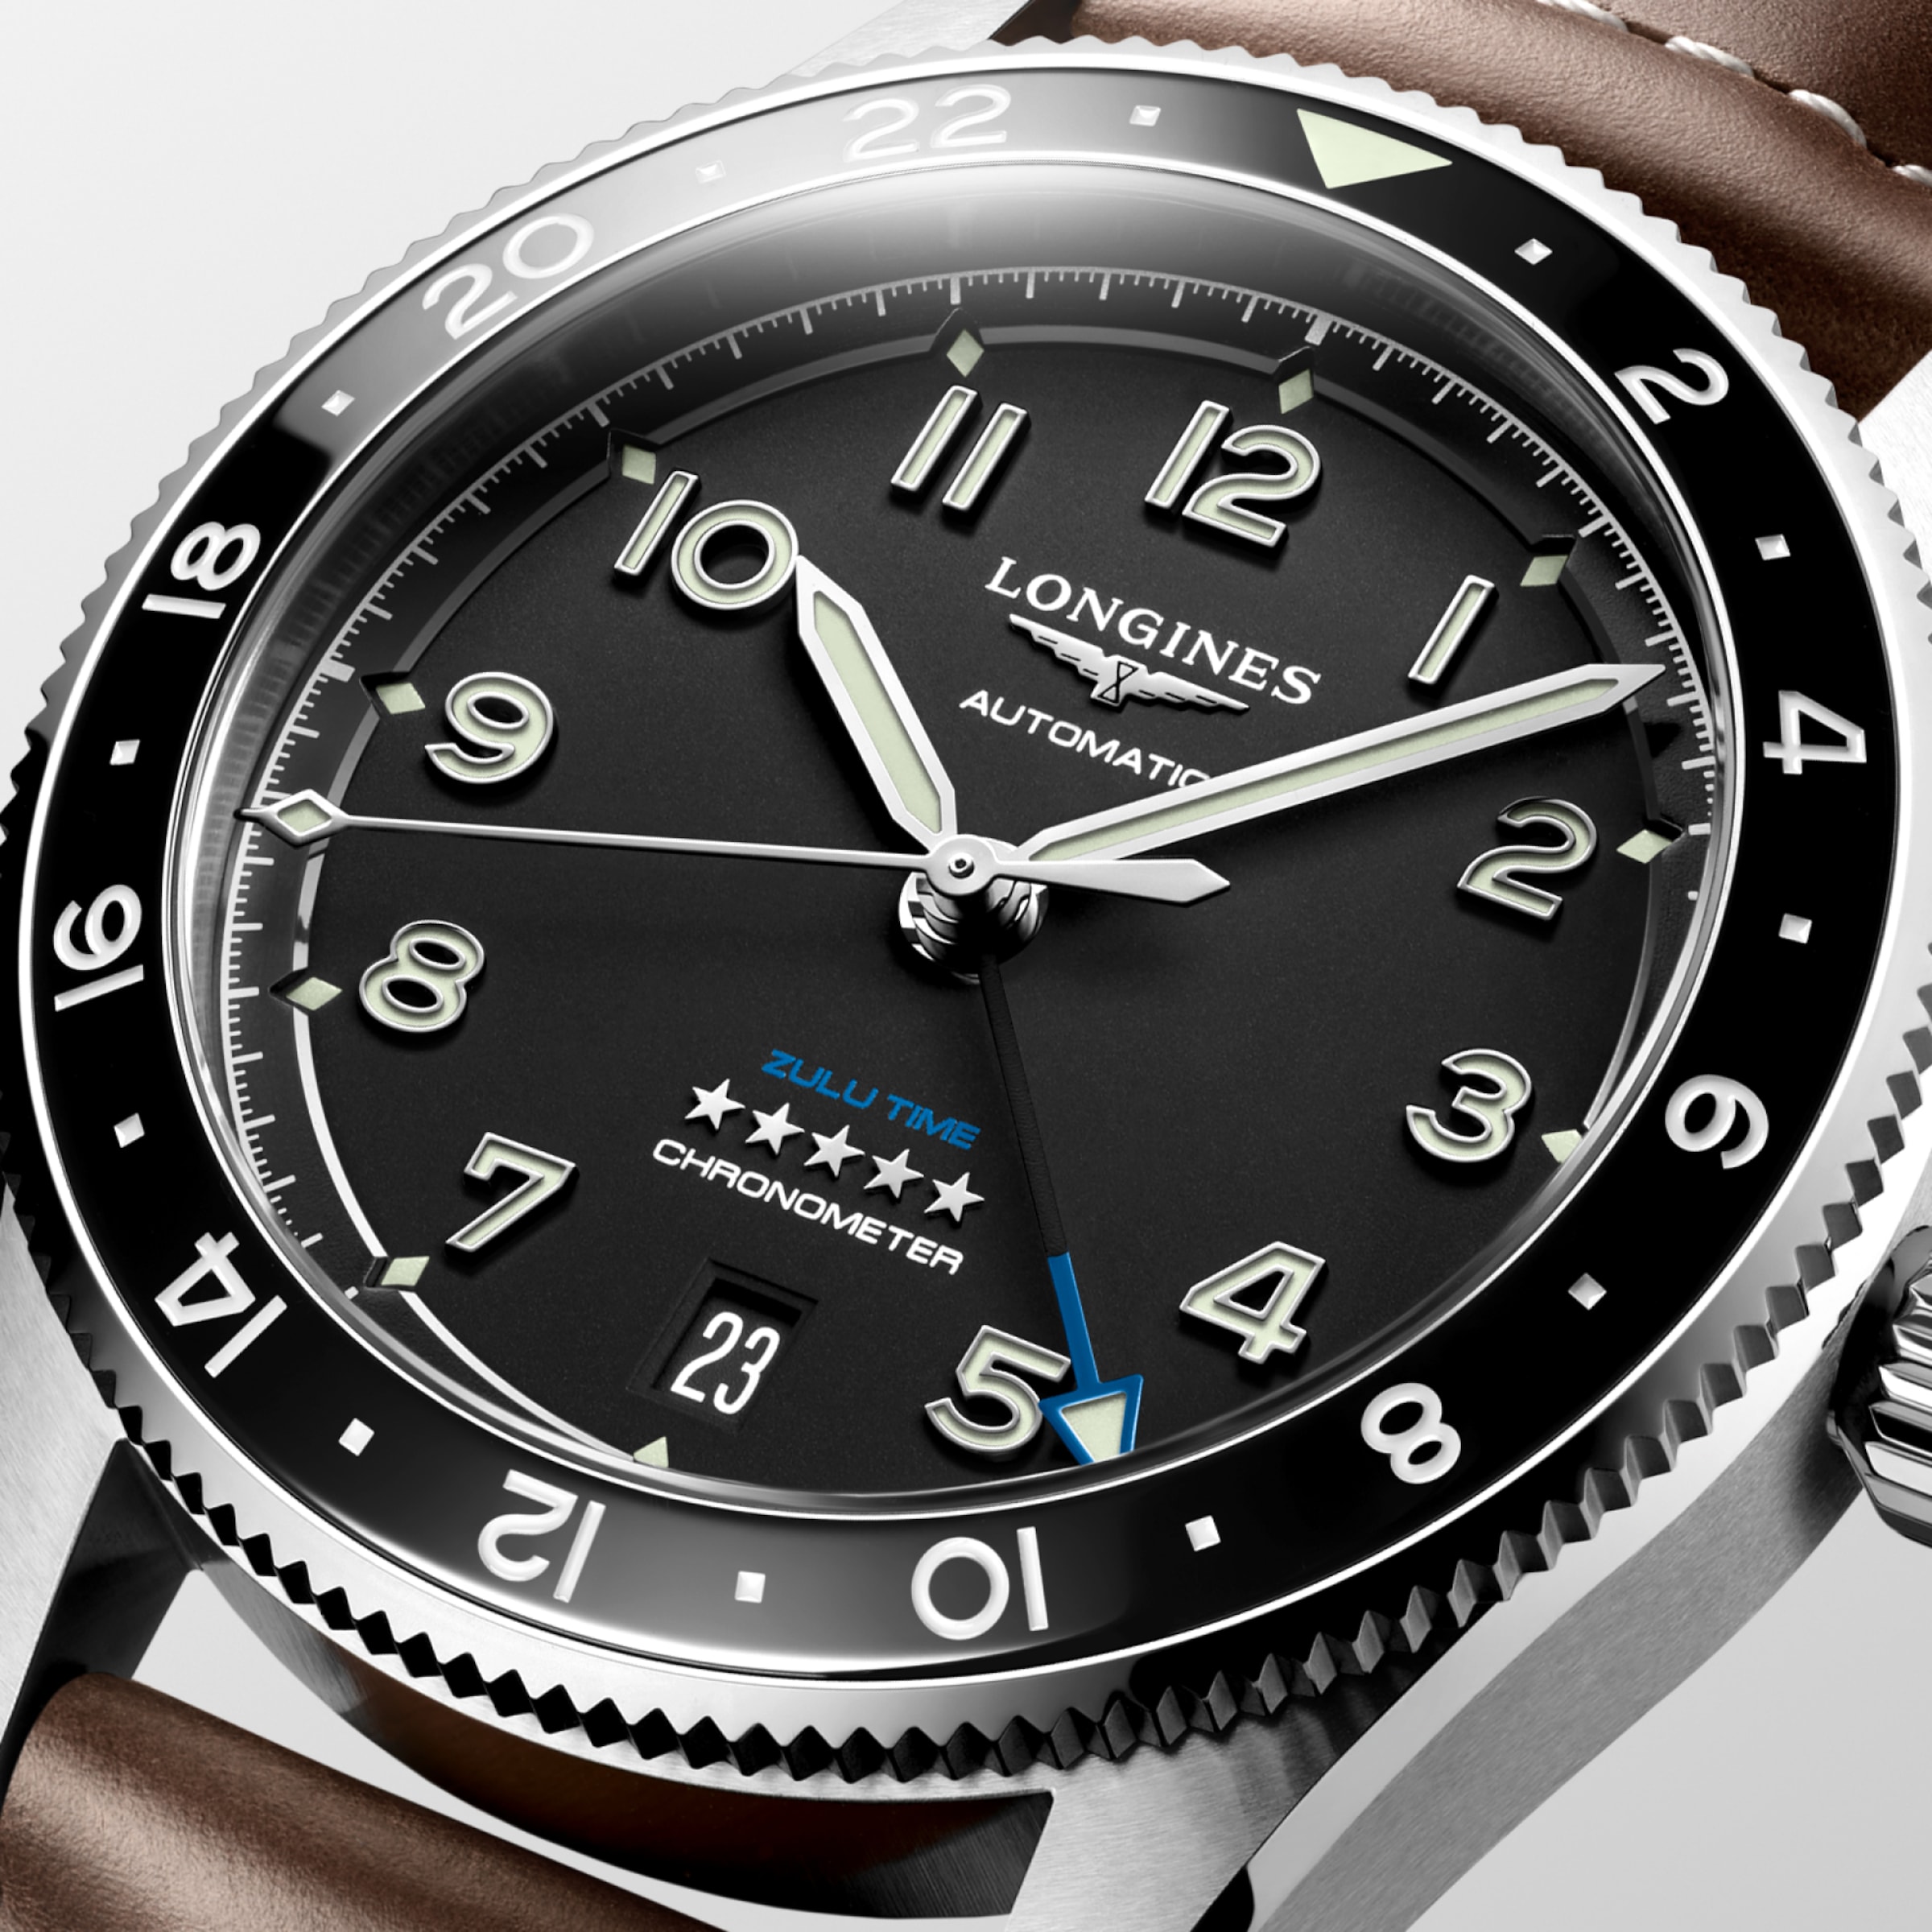 Longines SPIRIT Automatic Stainless steel and ceramic bezel Watch - L3.802.4.53.2